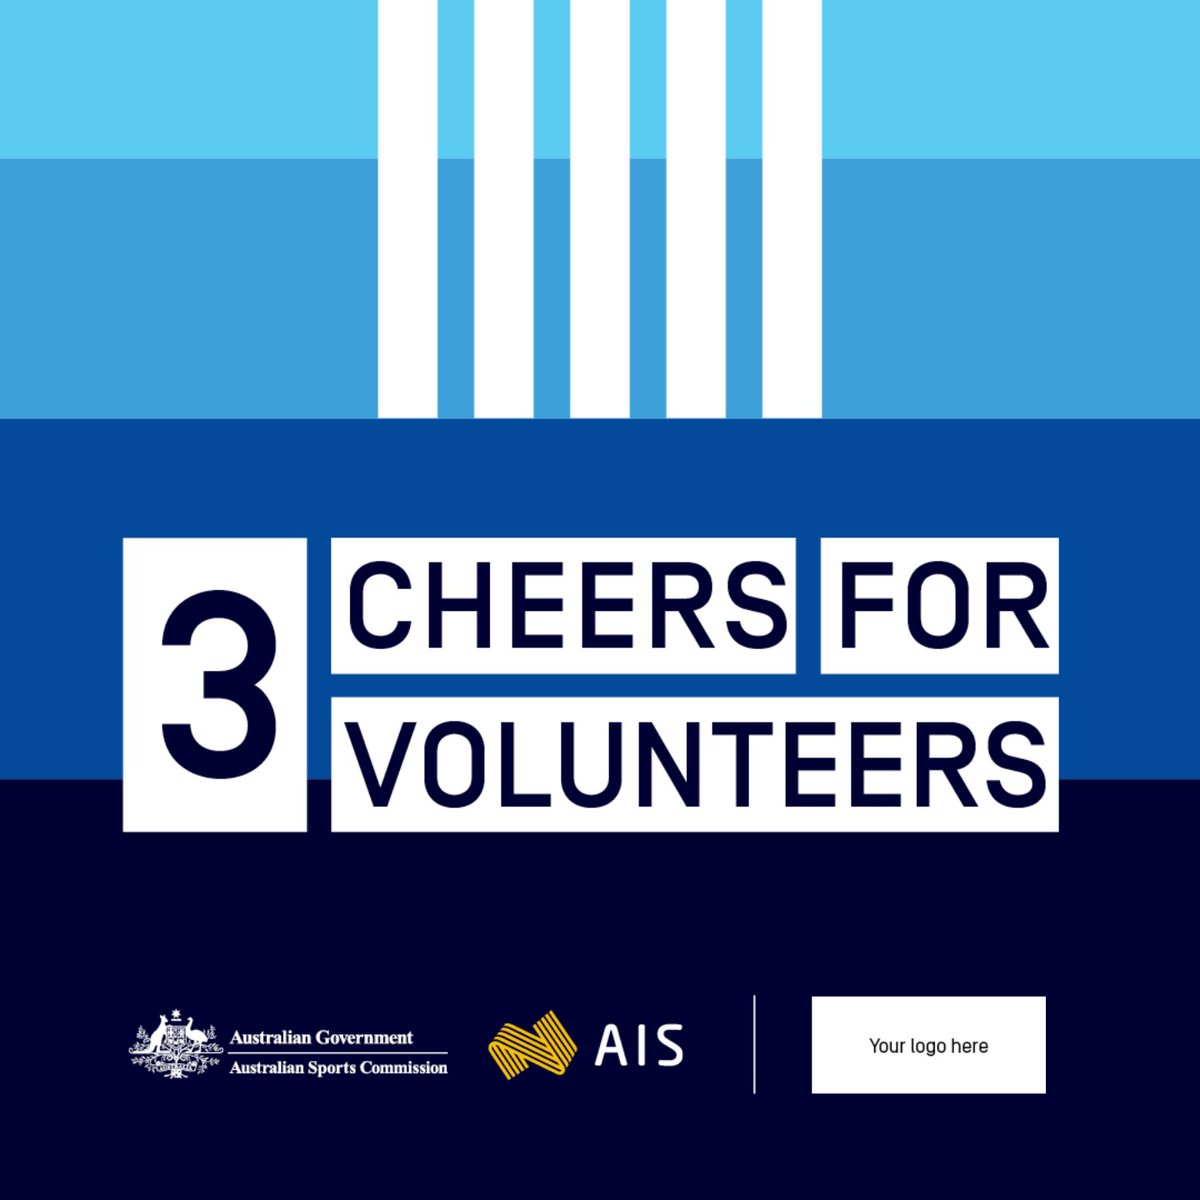 This week marks #NationalVolunteersWeek, providing an opportunity to highlight the important role of volunteers in our community. Hear from some of our members what they enjoy most about volunteering 👉 skateaustralia.org.au/post/skate-aus… #3CheersforVolunteers